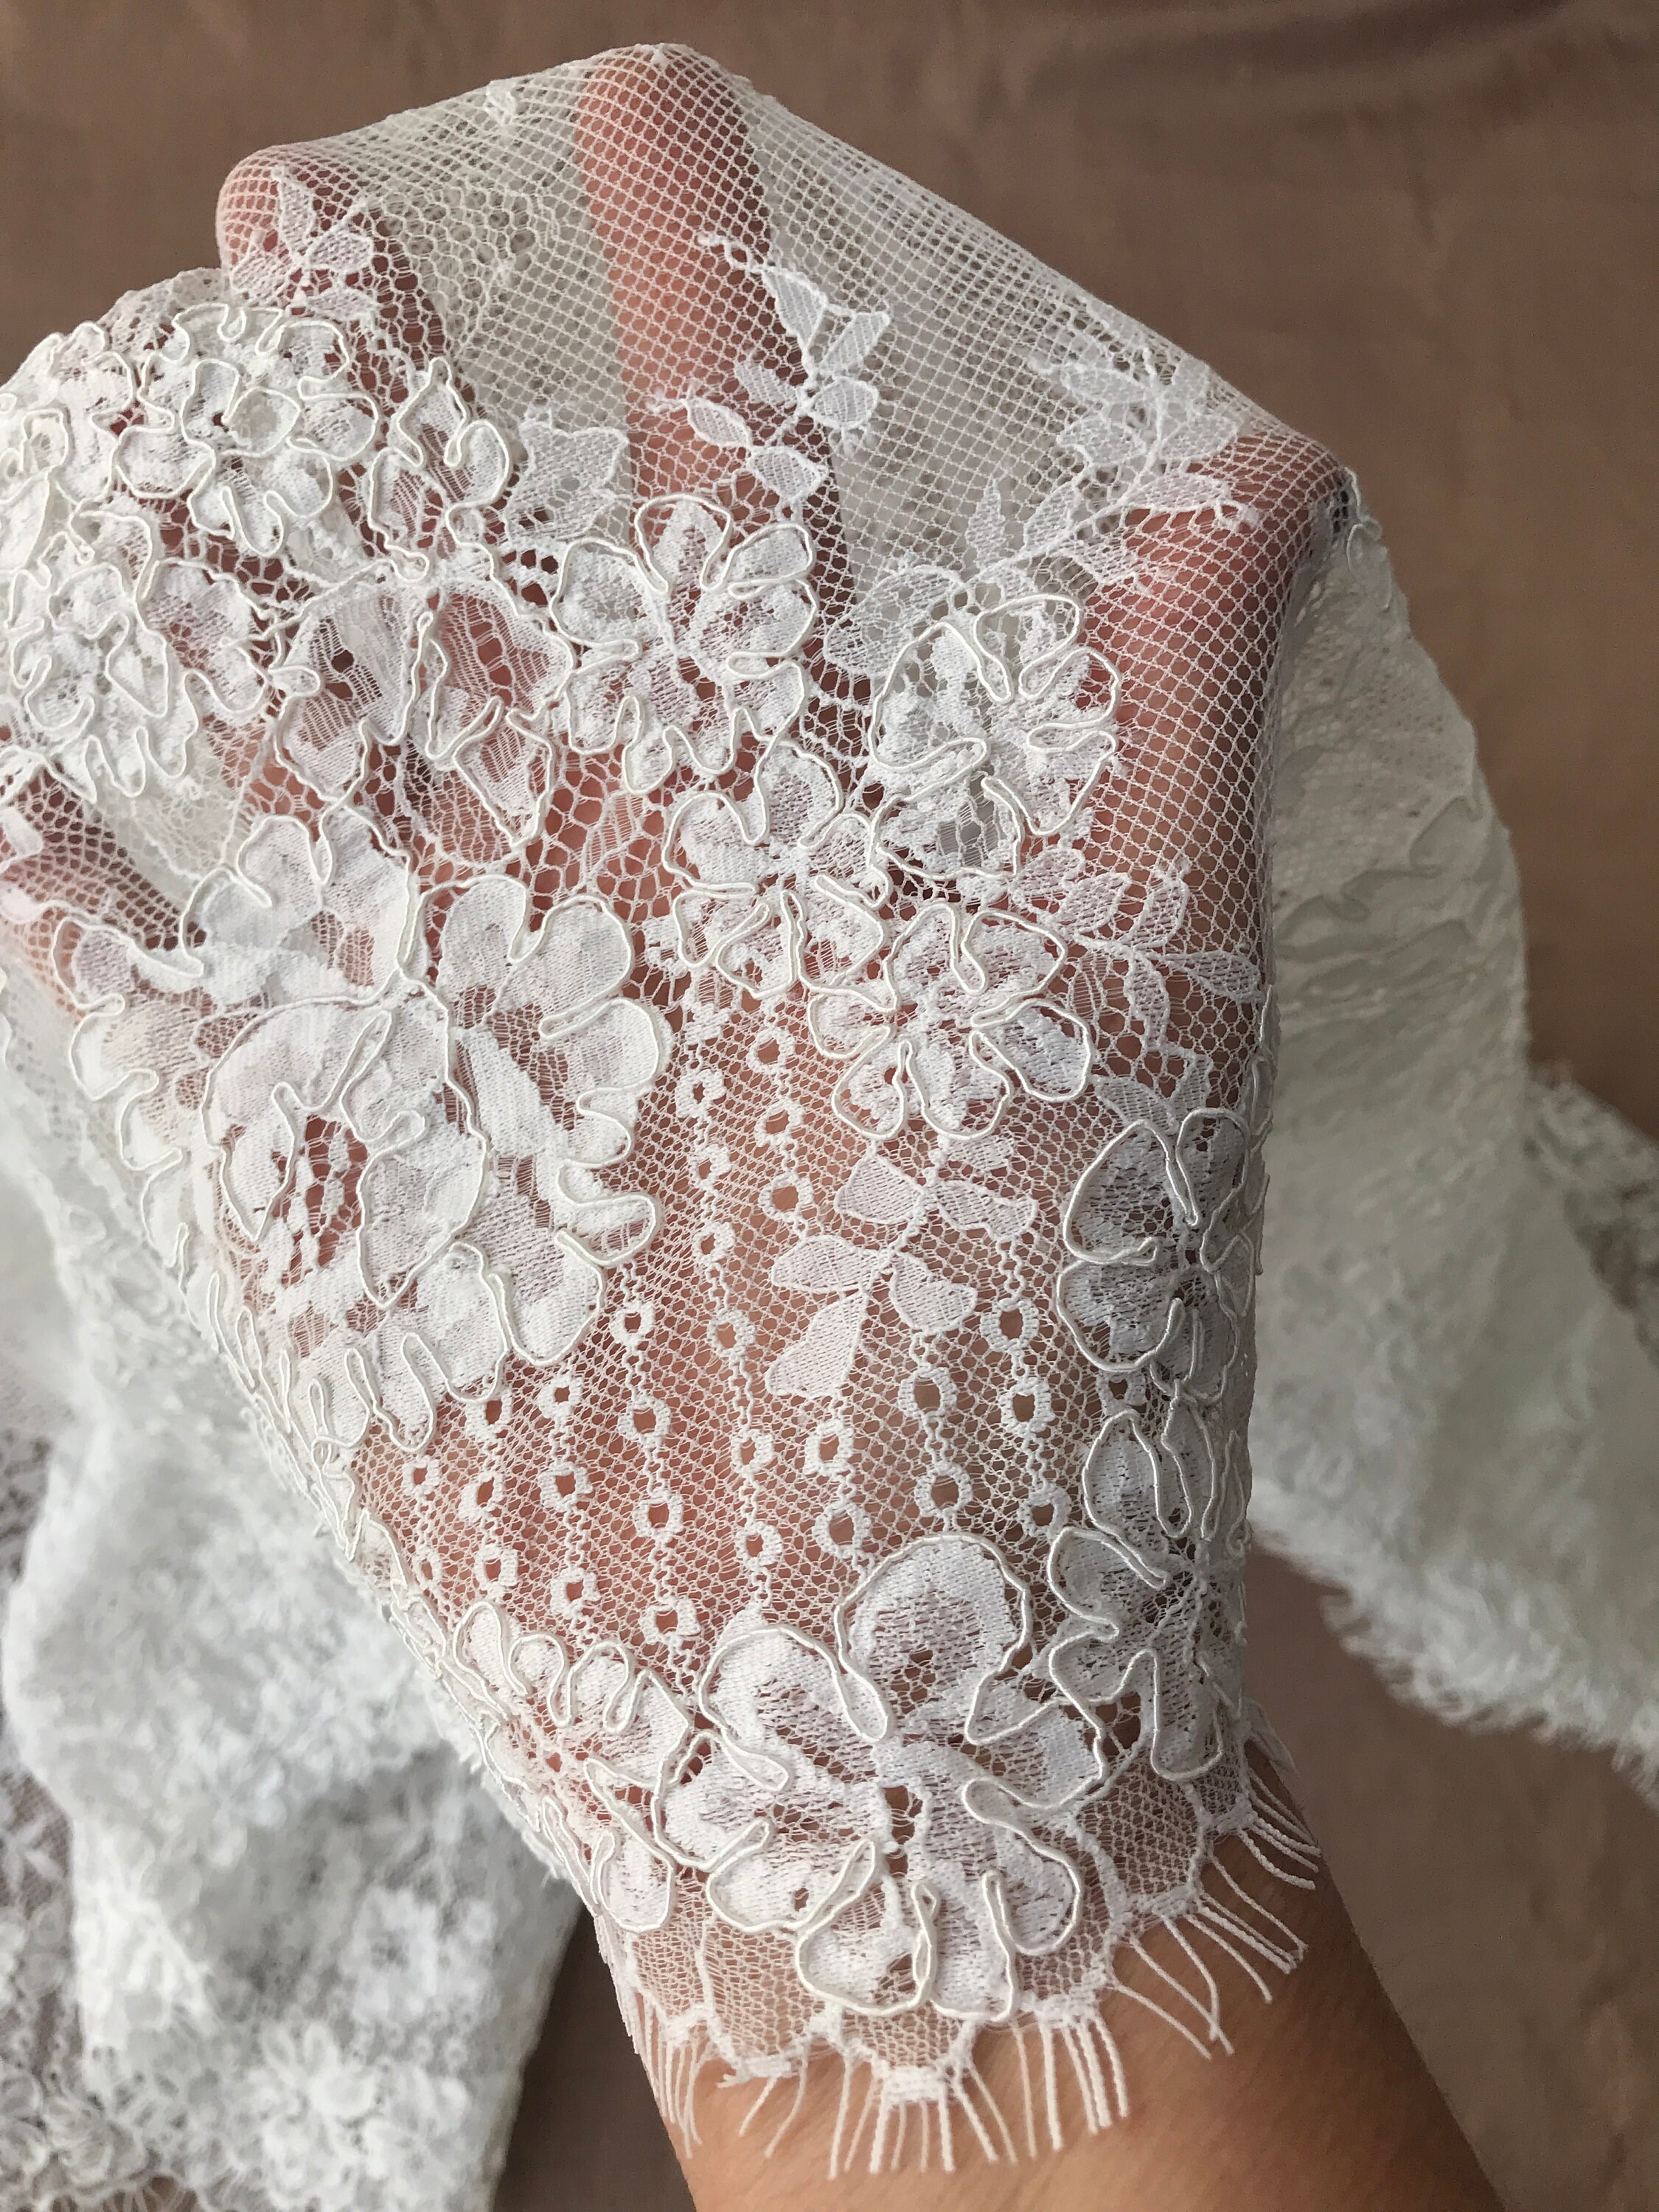 Off White Ivory Bridal Lace Corded Border Lace Scallop Edge - Etsy